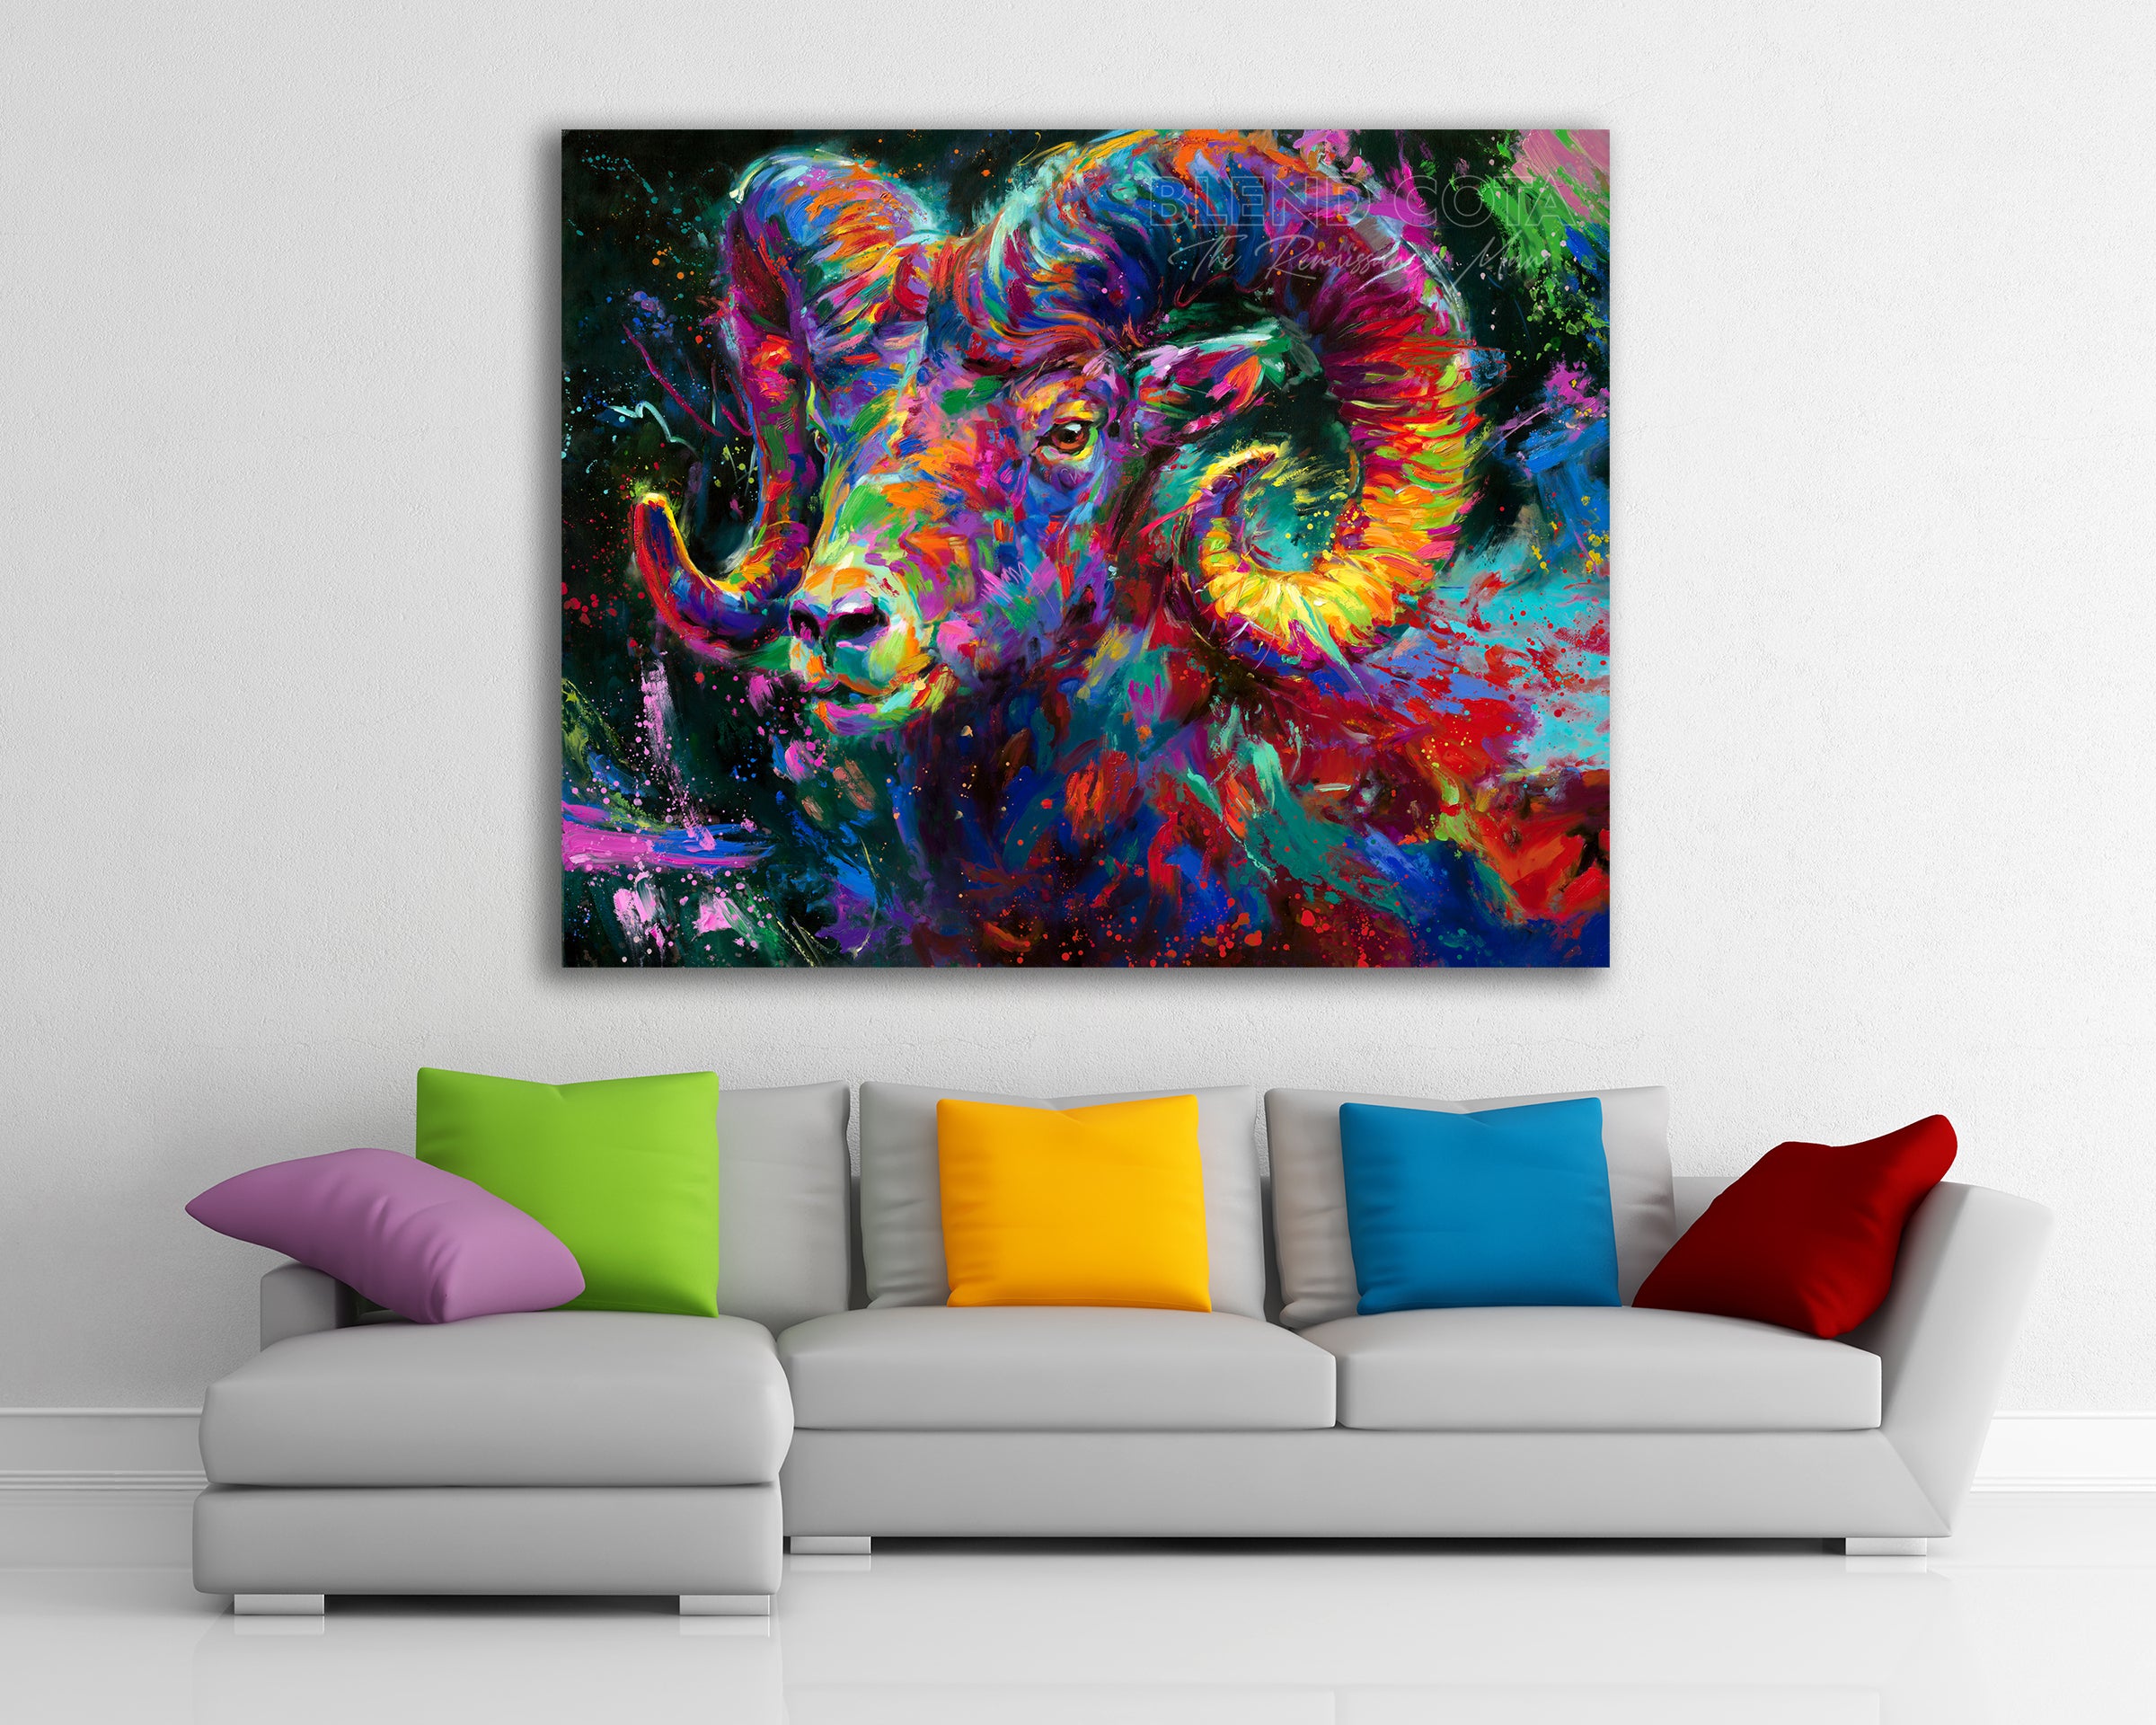 The Ram Spirit painted by Blend Cota original oil painting from Blend Cota Studios 